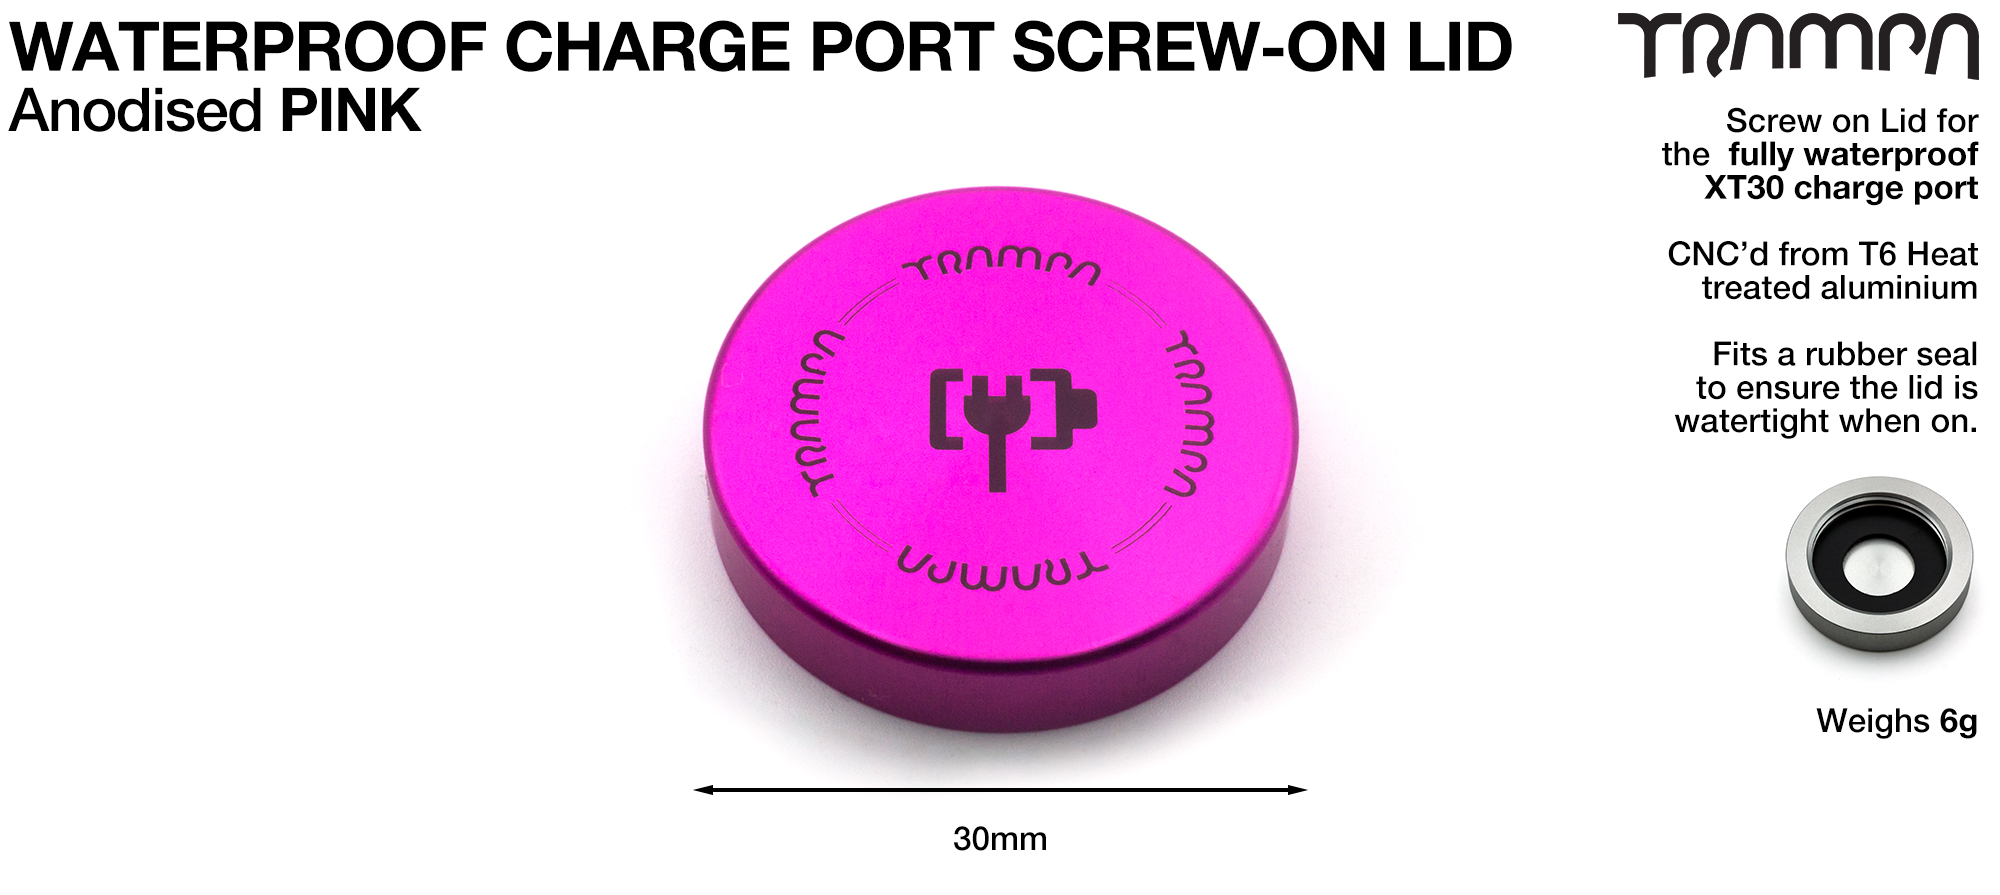 14FIFTIES Charge Point TOP - Anodised PINK